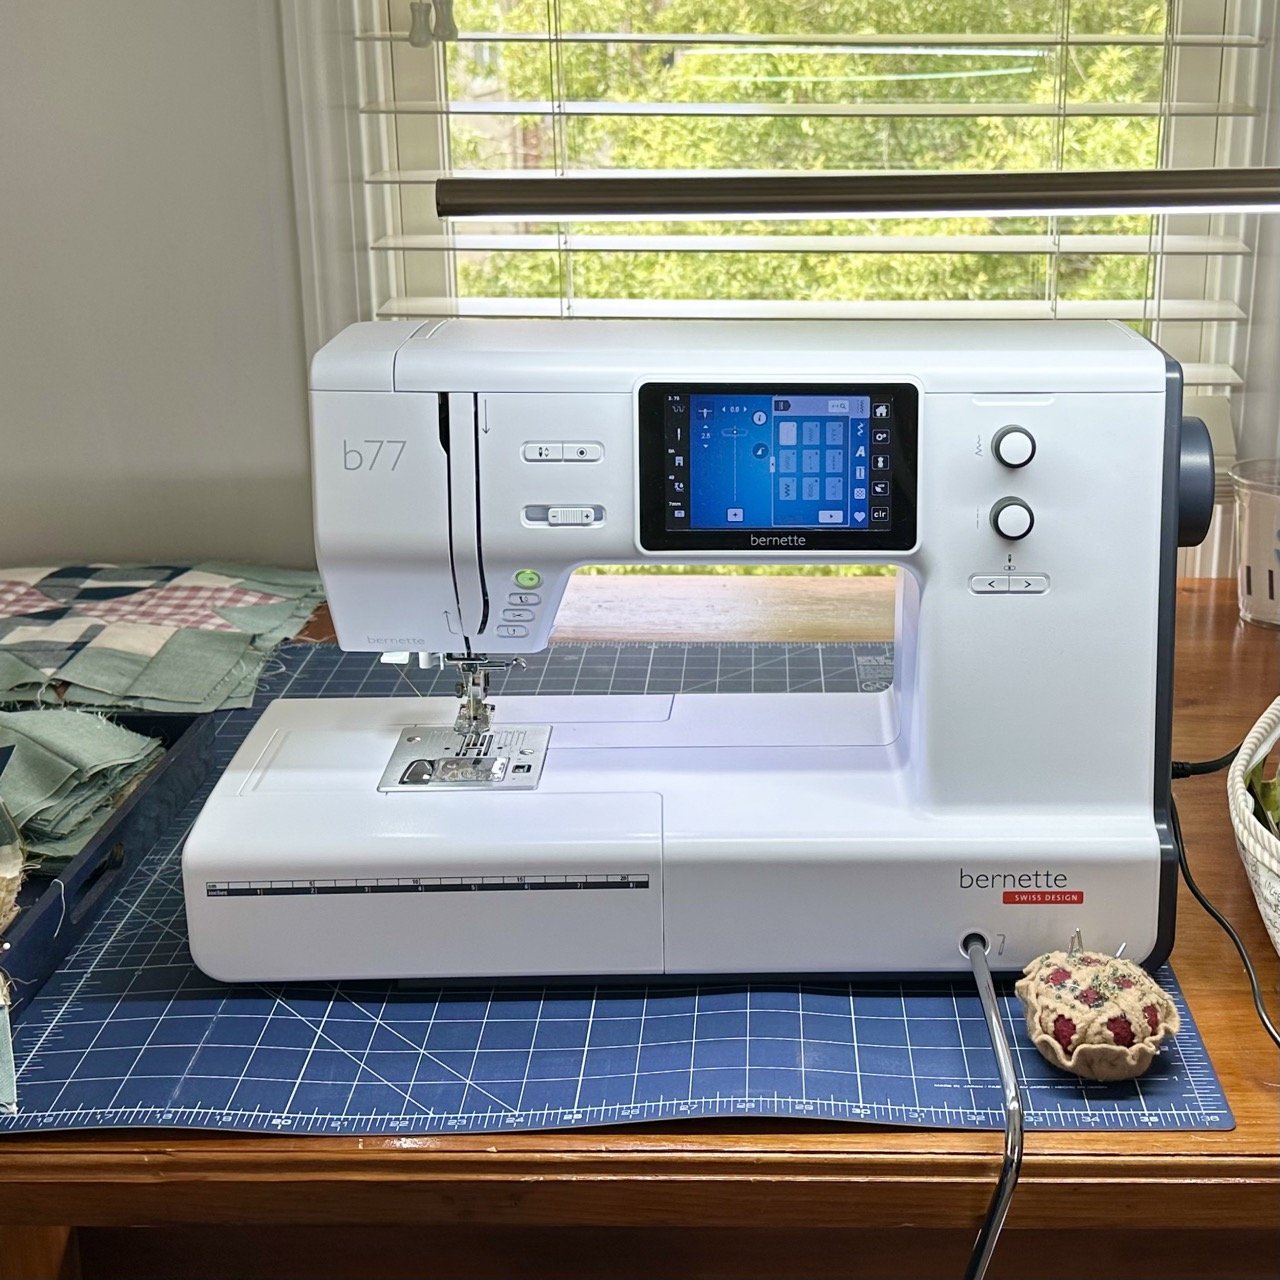 b77 Bernette Sewing Machine Review — String & Story